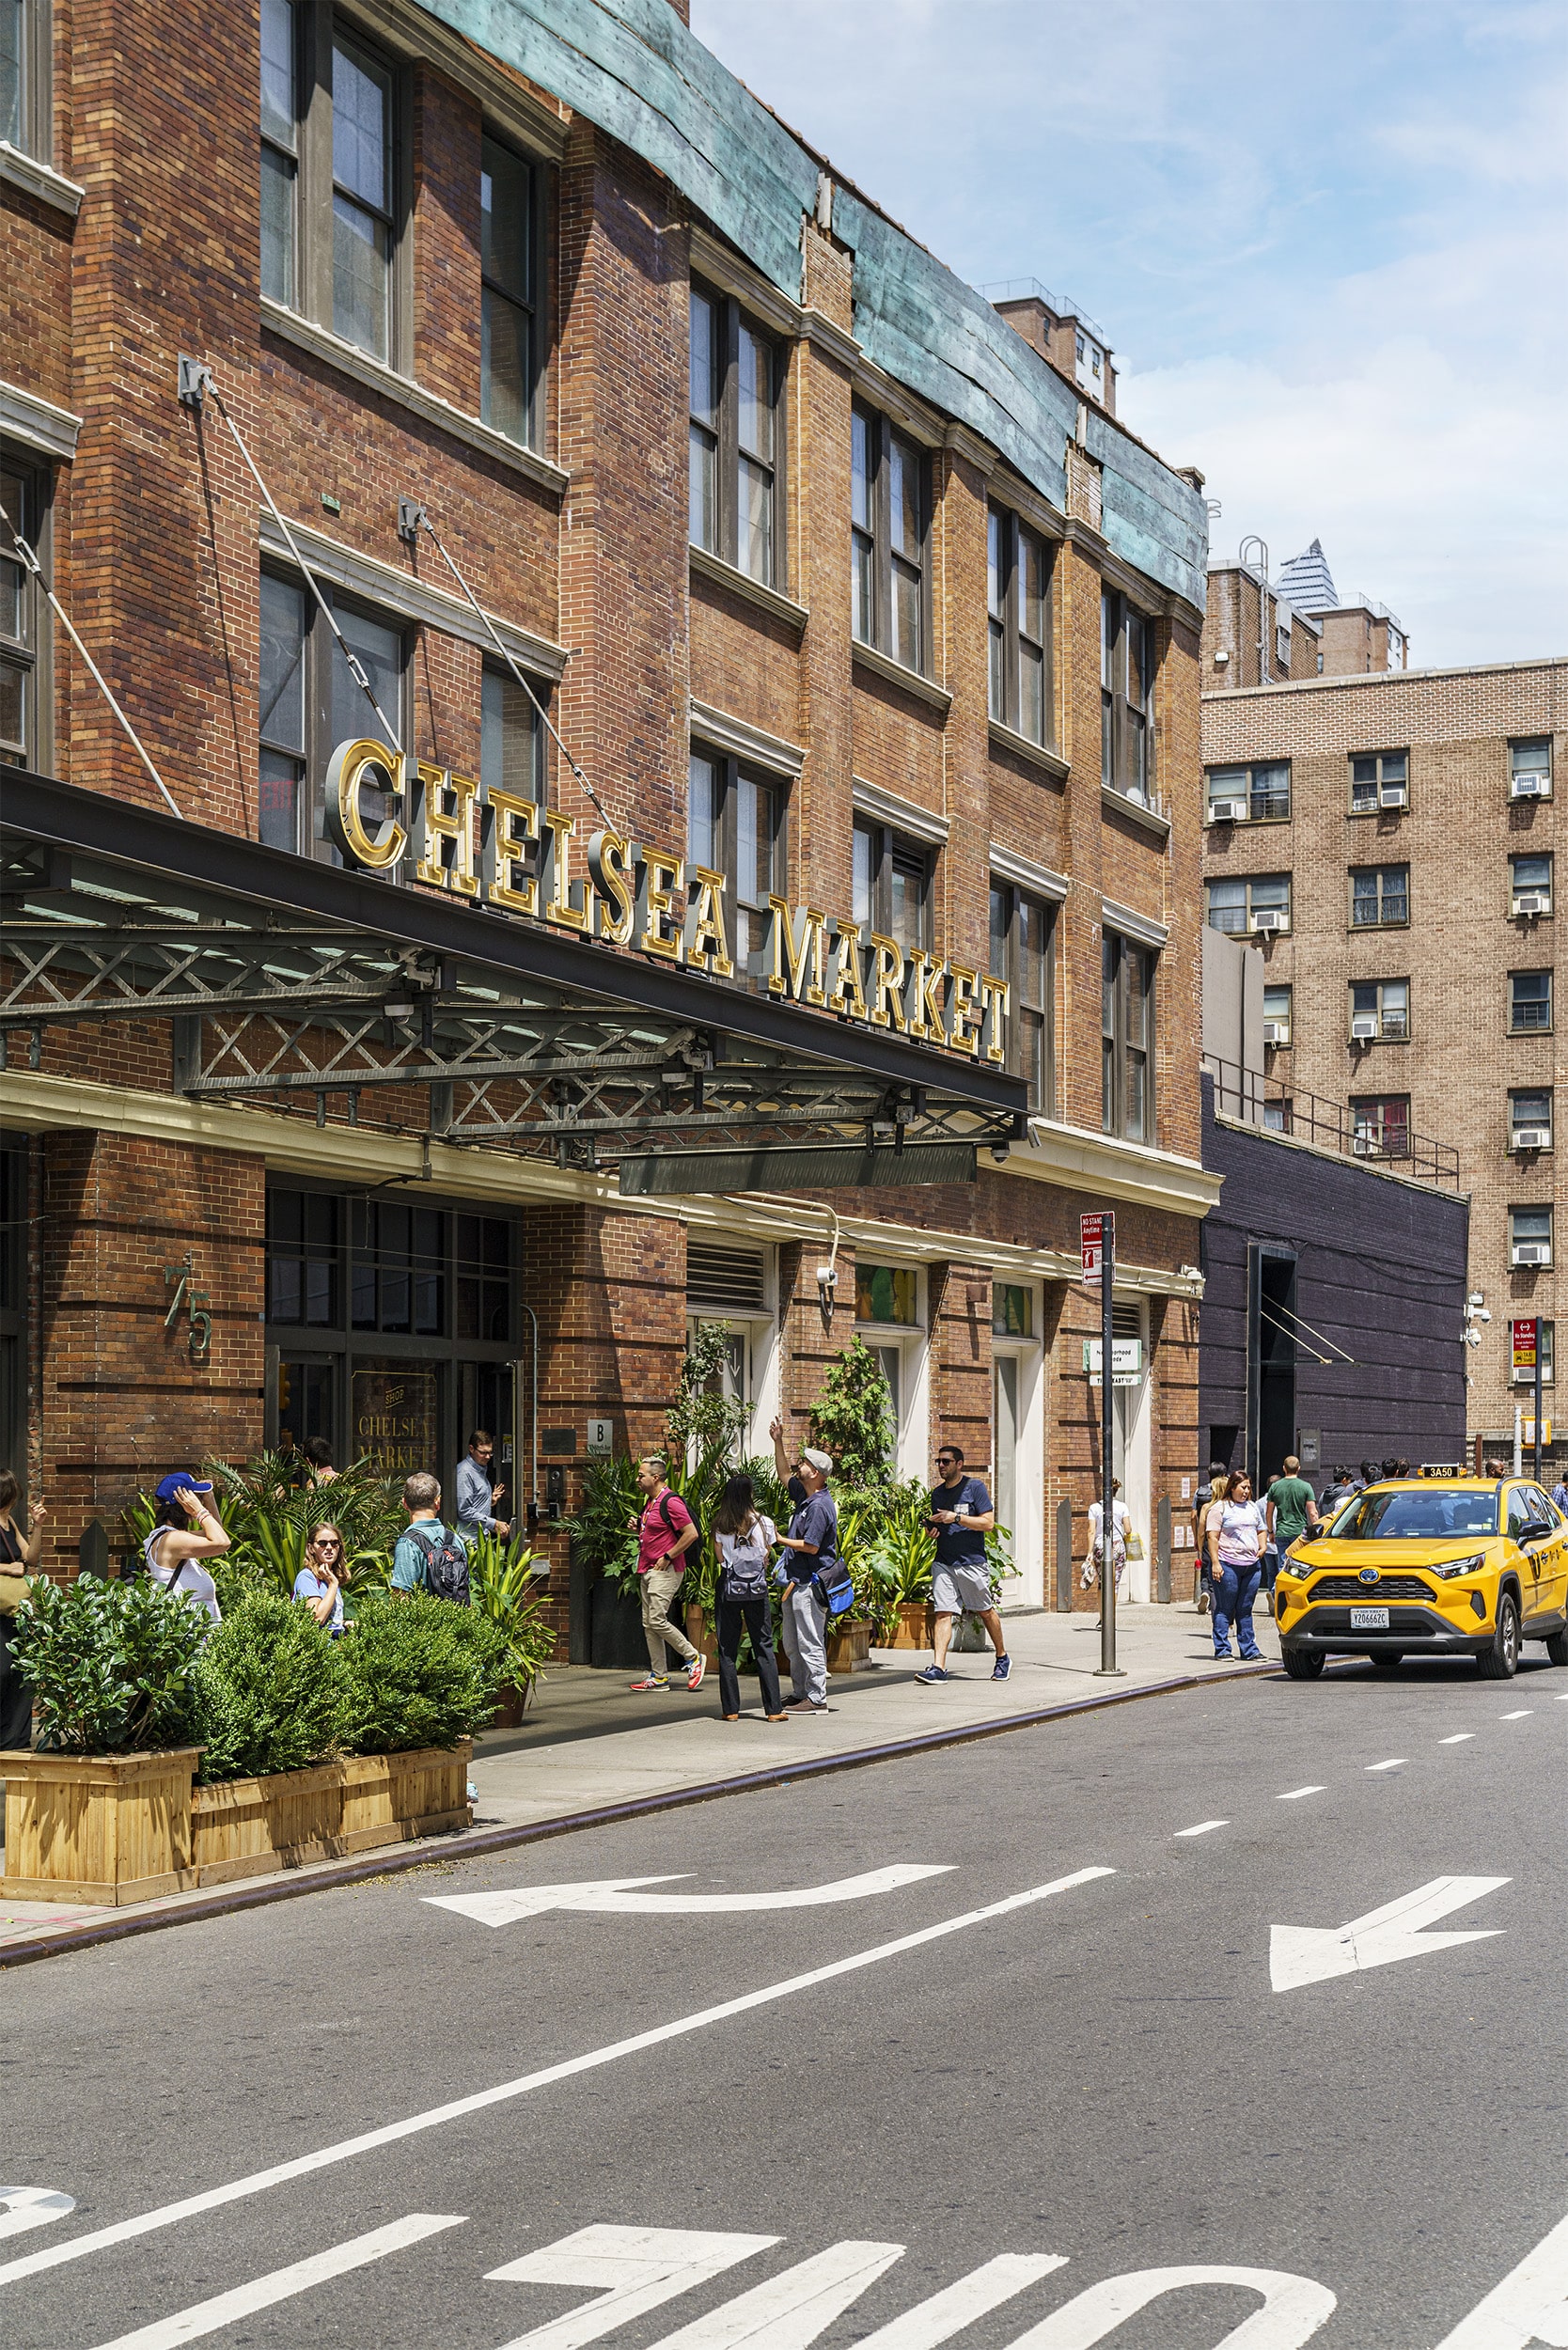 The signage for Chelsea Market near Chelsea Canvas